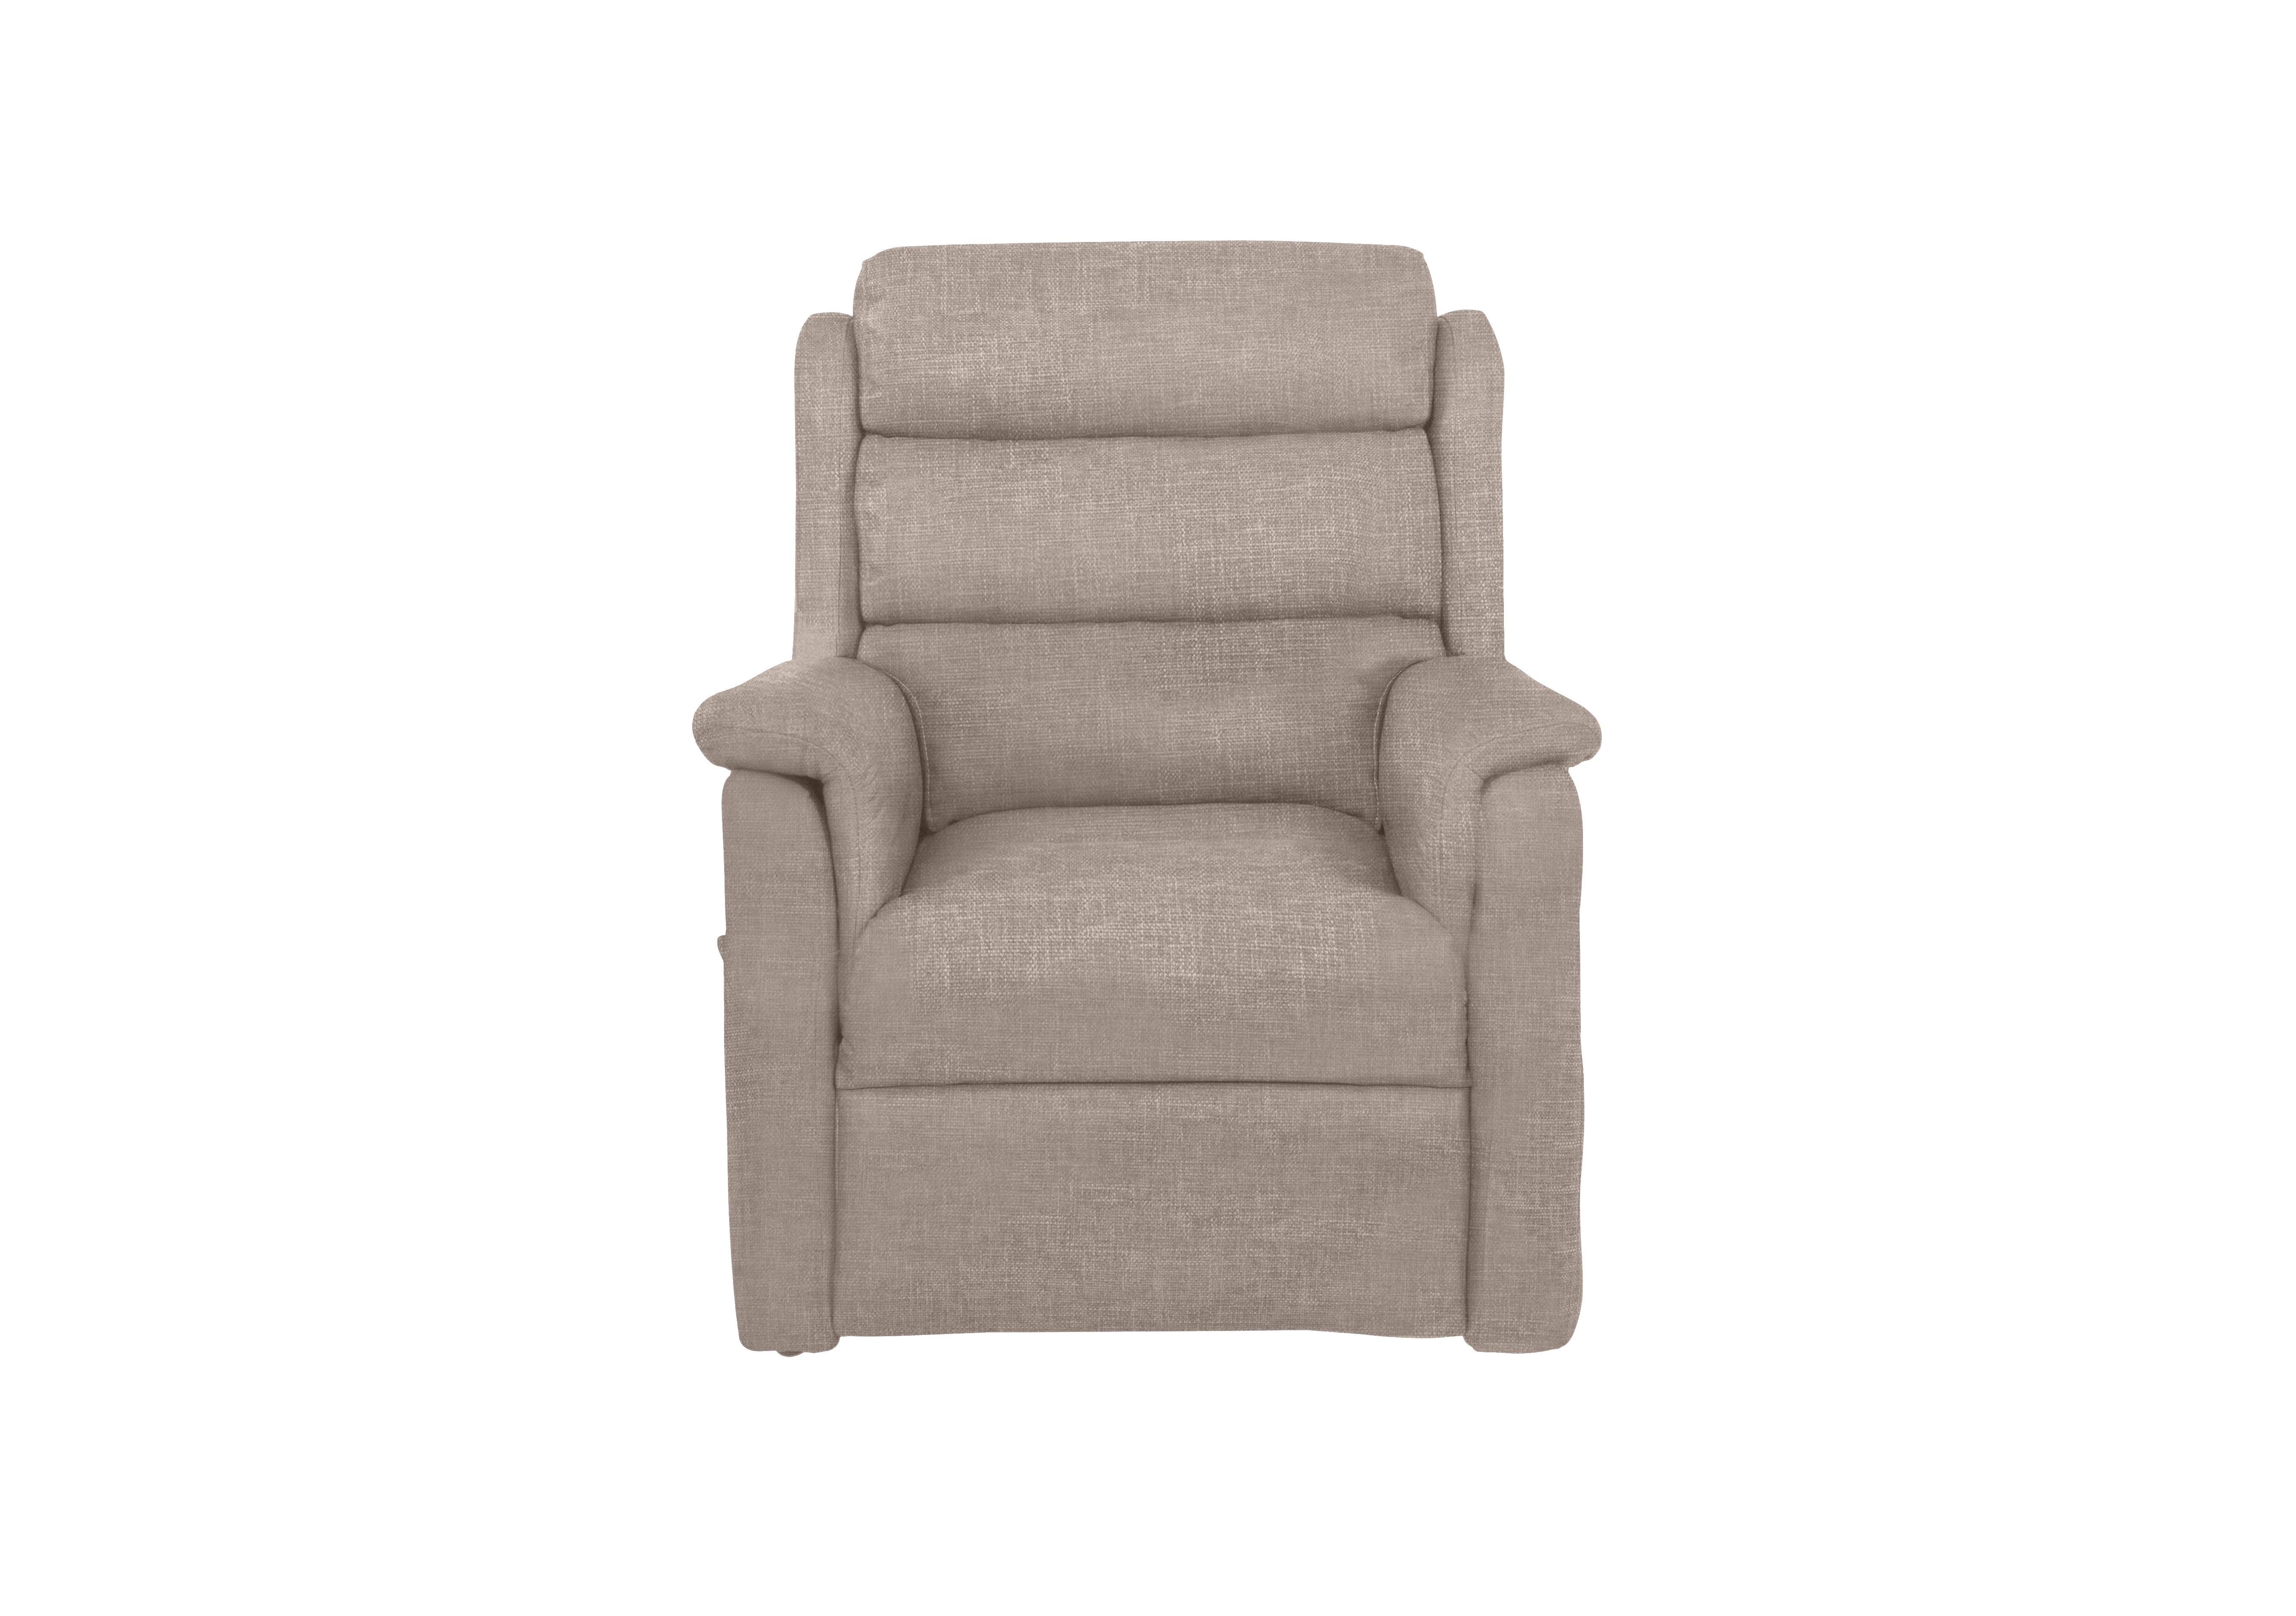 My Chair McCoy Fabric Lift and Rise Chair in 14445 Khaki Anivia 04 on Furniture Village